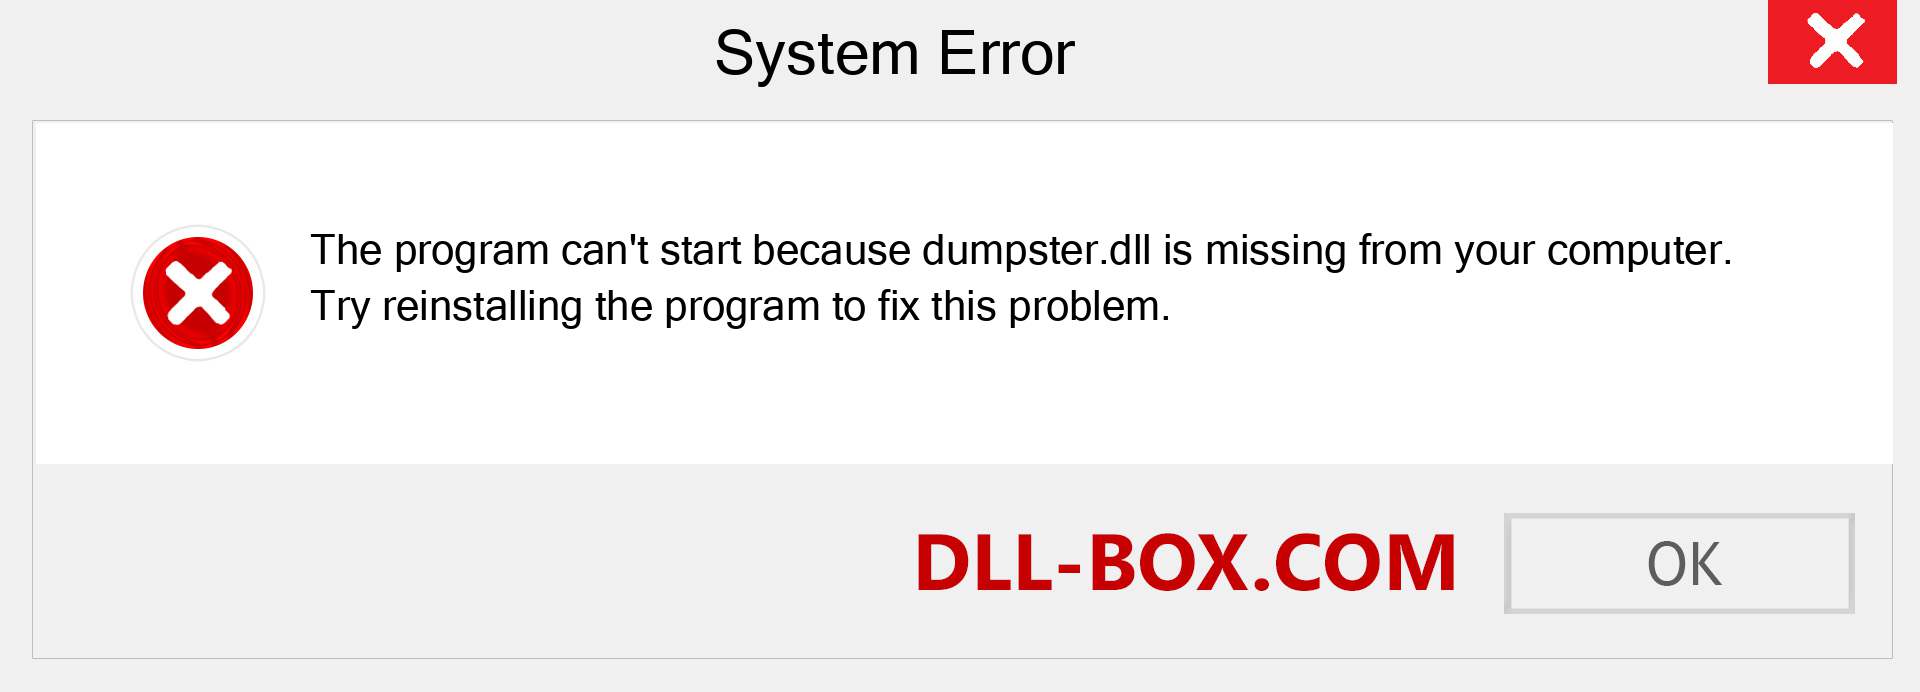  dumpster.dll file is missing?. Download for Windows 7, 8, 10 - Fix  dumpster dll Missing Error on Windows, photos, images